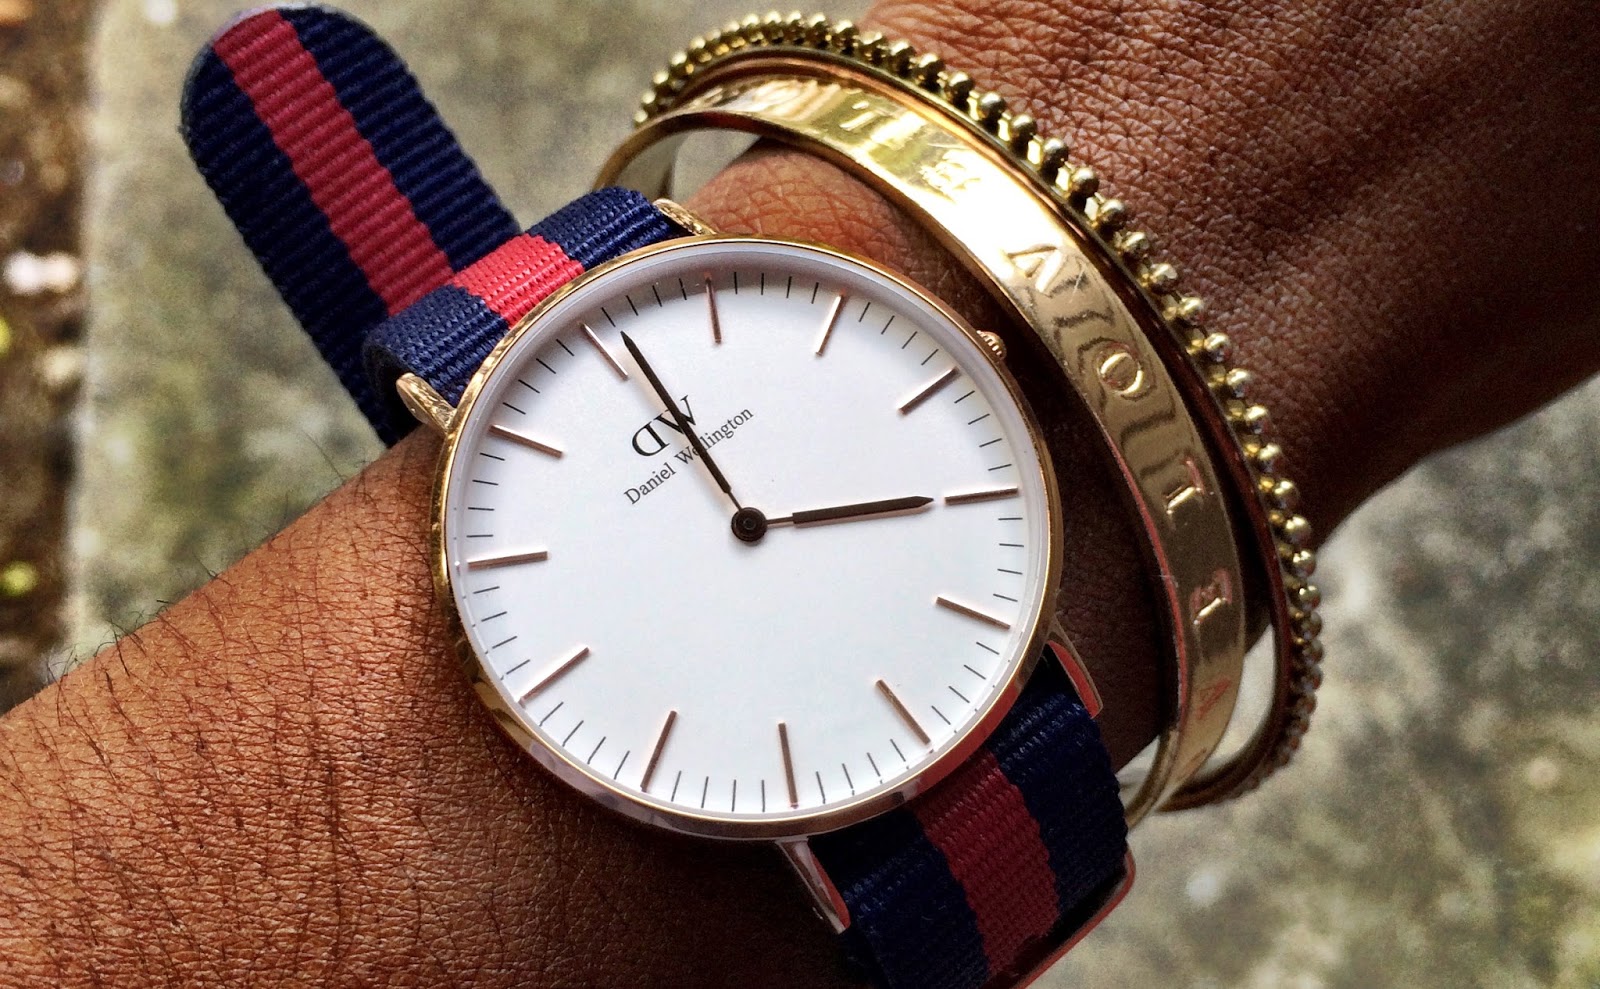 WHAT WORE: Daniel Wellington Classic Lady - It's Arkeedah | Source for all things Fashion, Beauty and Lifestyle